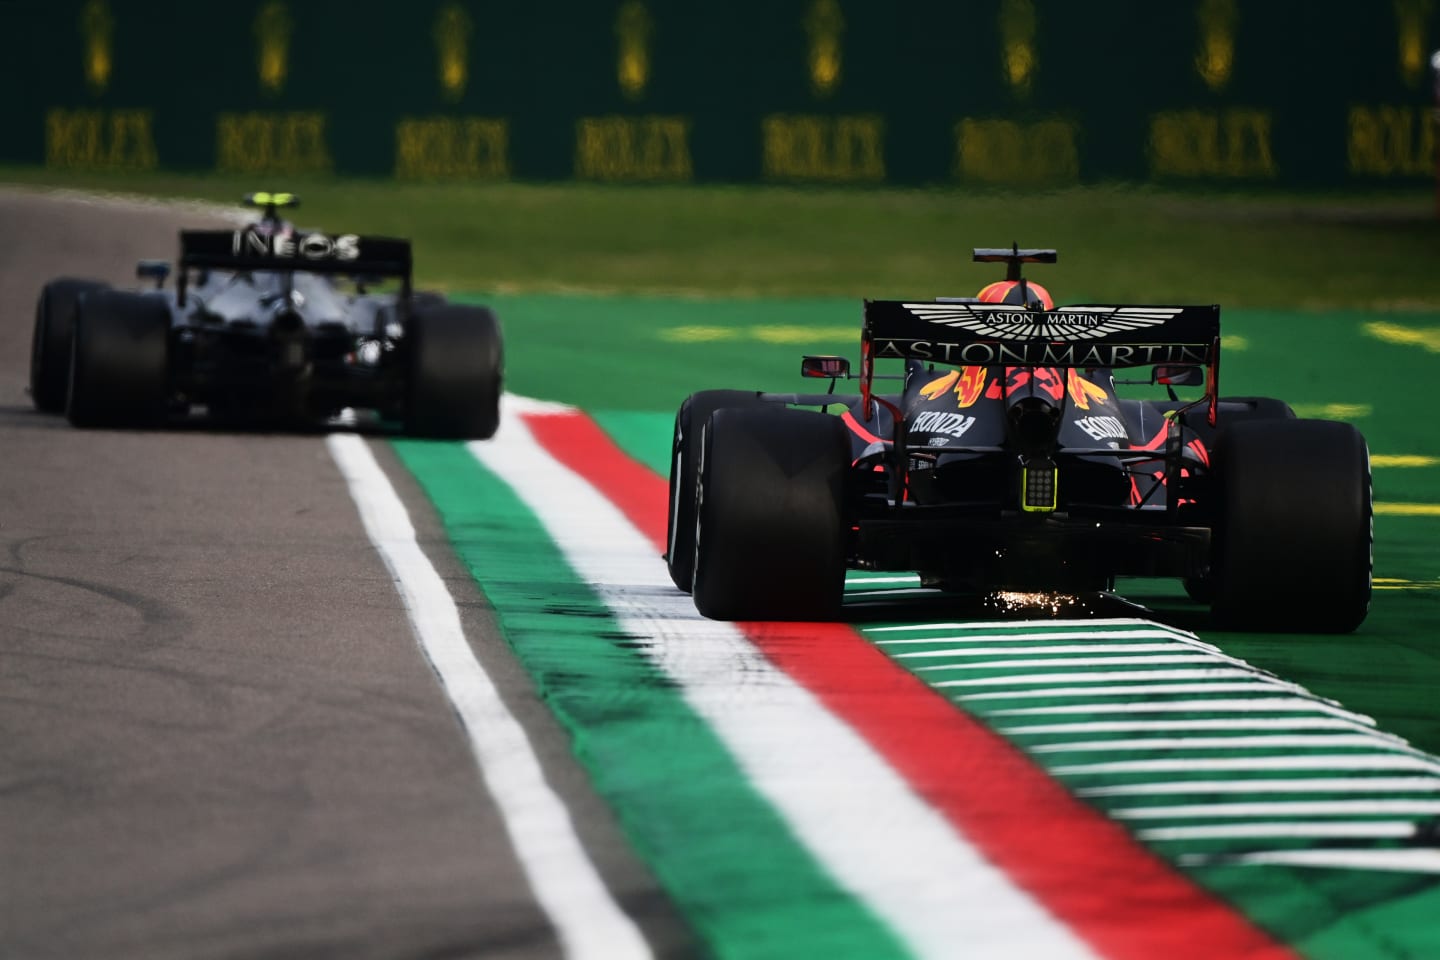 IMOLA, ITALY - NOVEMBER 01: Max Verstappen of the Netherlands driving the (33) Aston Martin Red Bull Racing RB16 on track during the F1 Grand Prix of Emilia Romagna at Autodromo Enzo e Dino Ferrari on November 01, 2020 in Imola, Italy. (Photo by Miguel Medina - Pool/Getty Images)